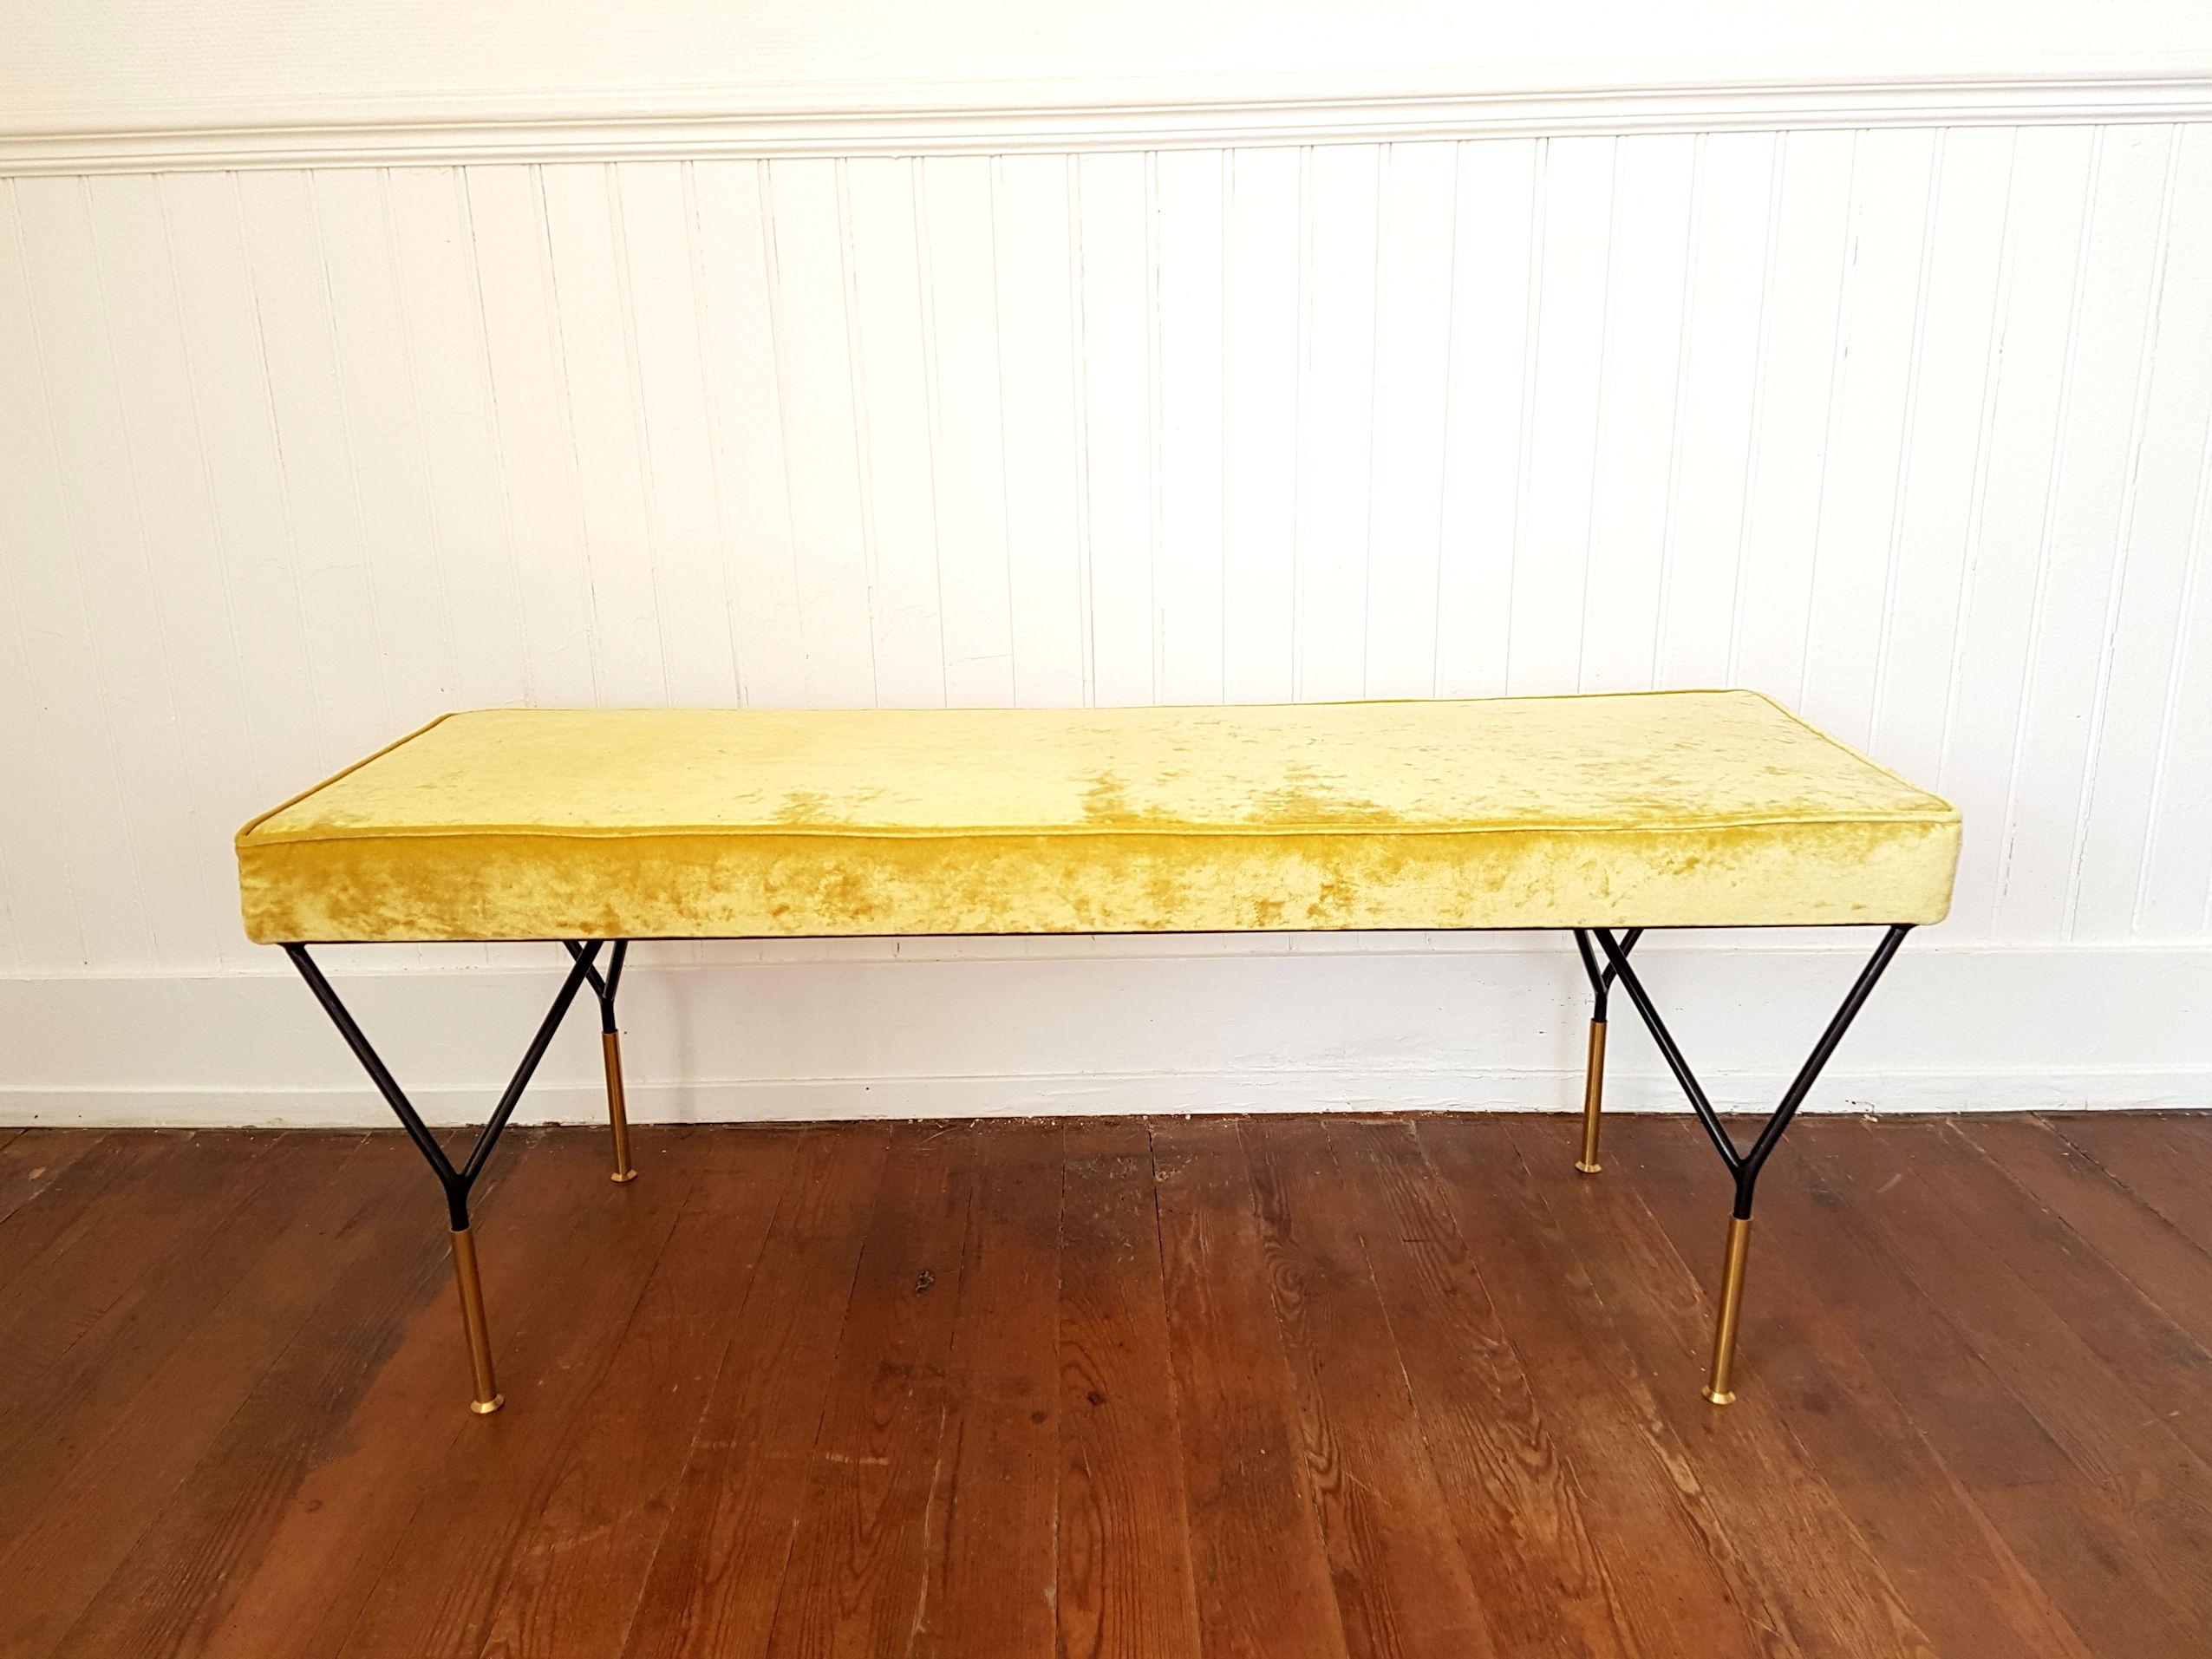 Late 20th Century Mid-Century Modern Italian Bench, Reupholstered with Yellow Velvet, circa 1980s